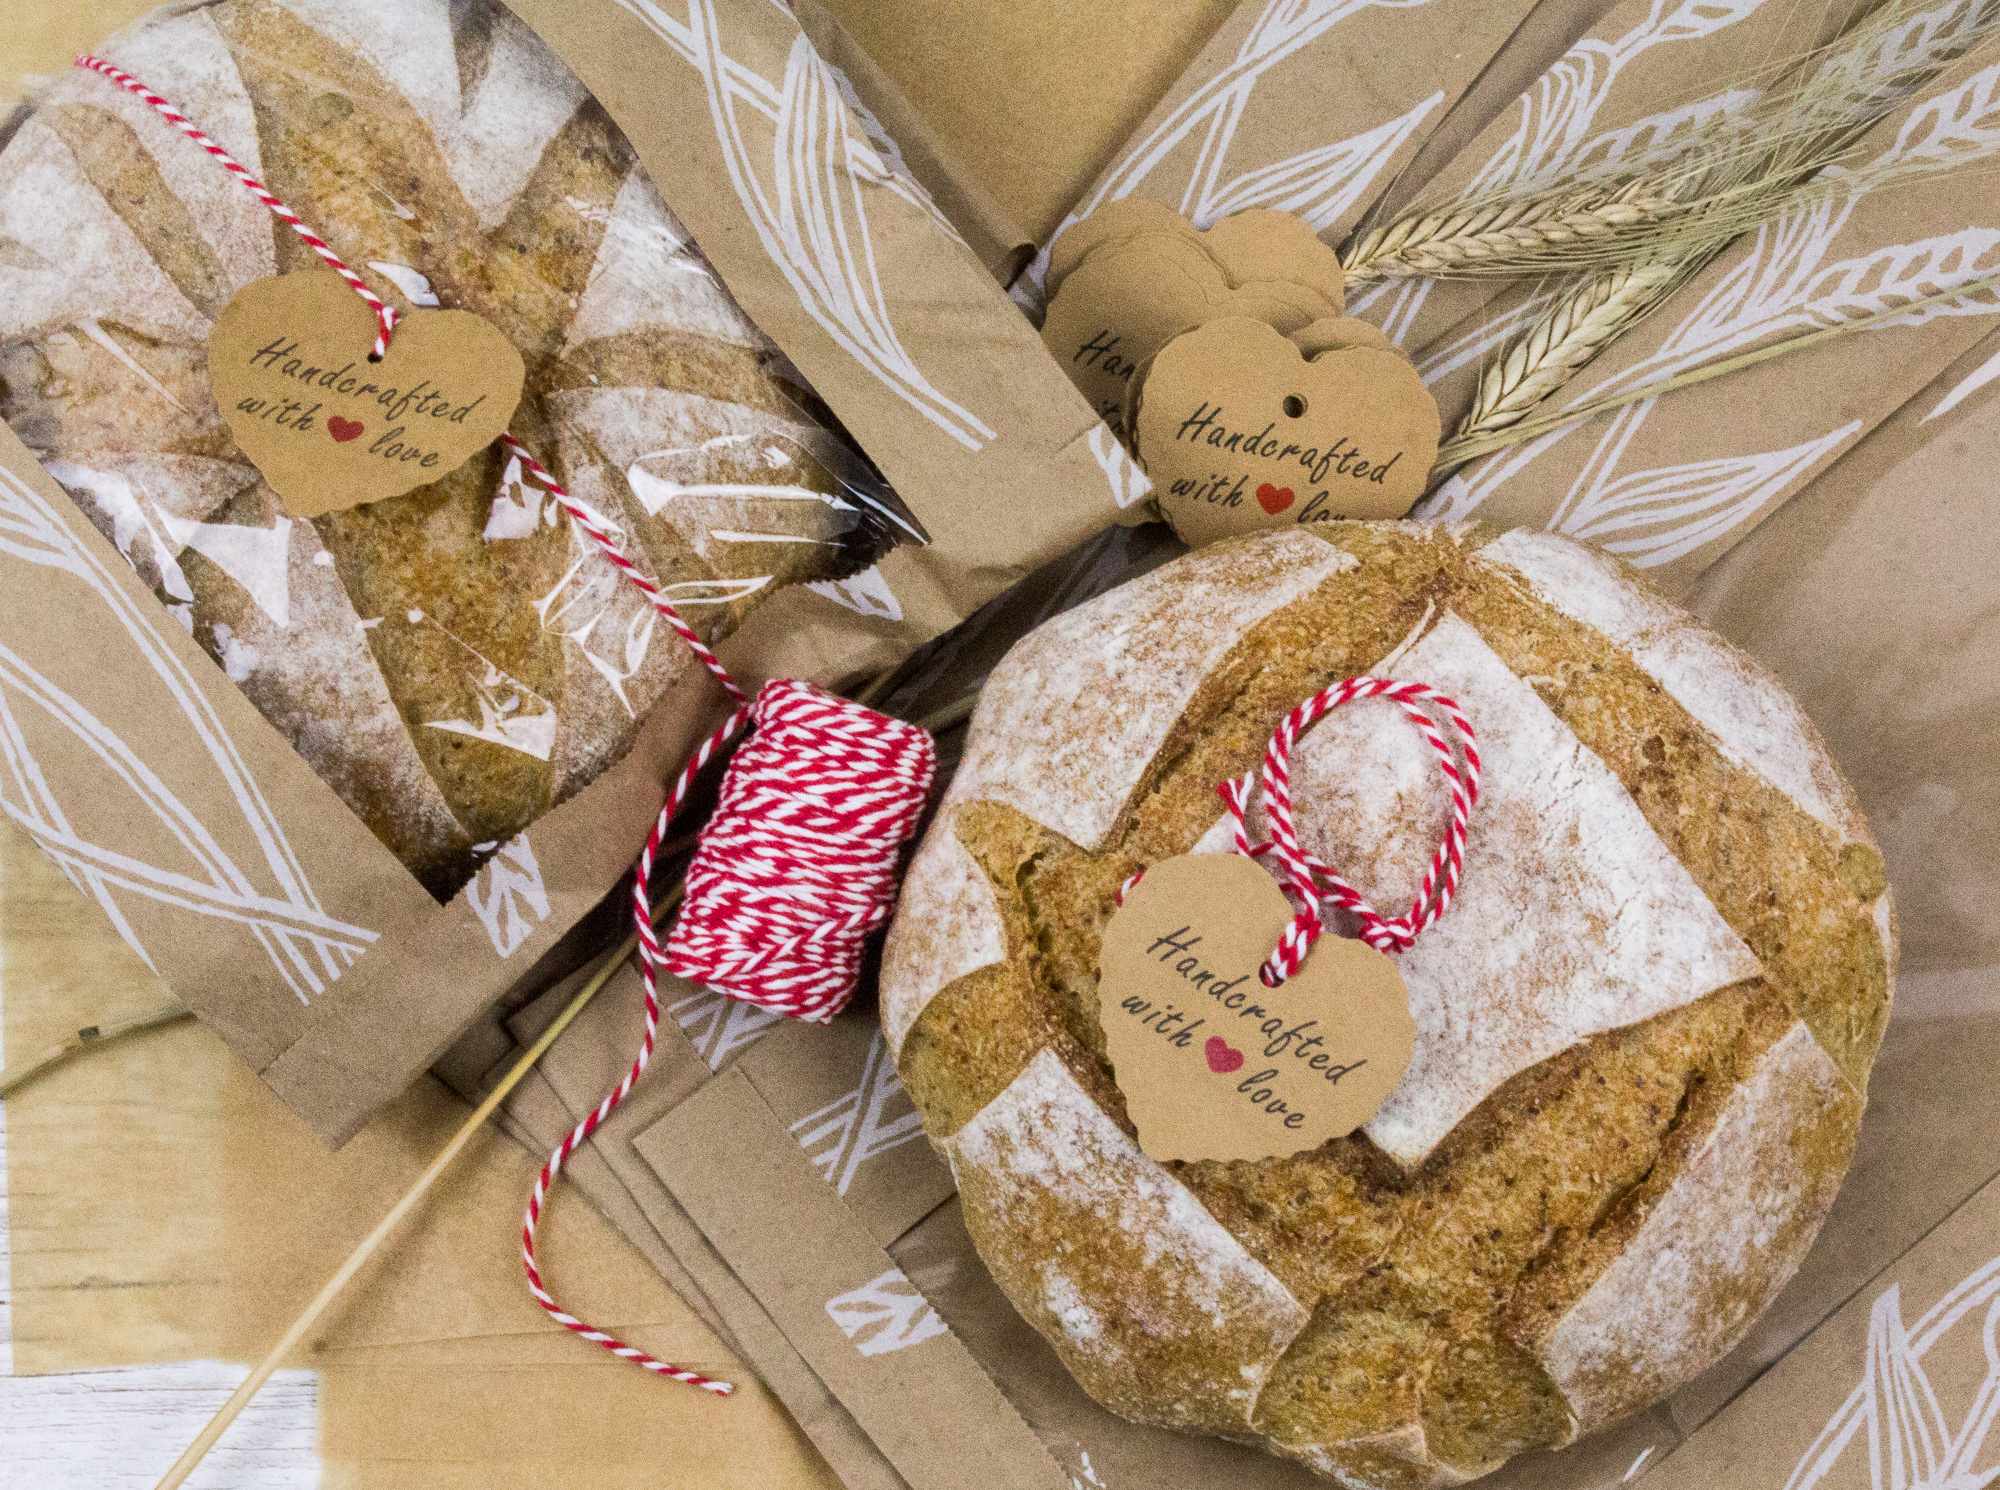 Round loaves in bread bags with Red/White Twine